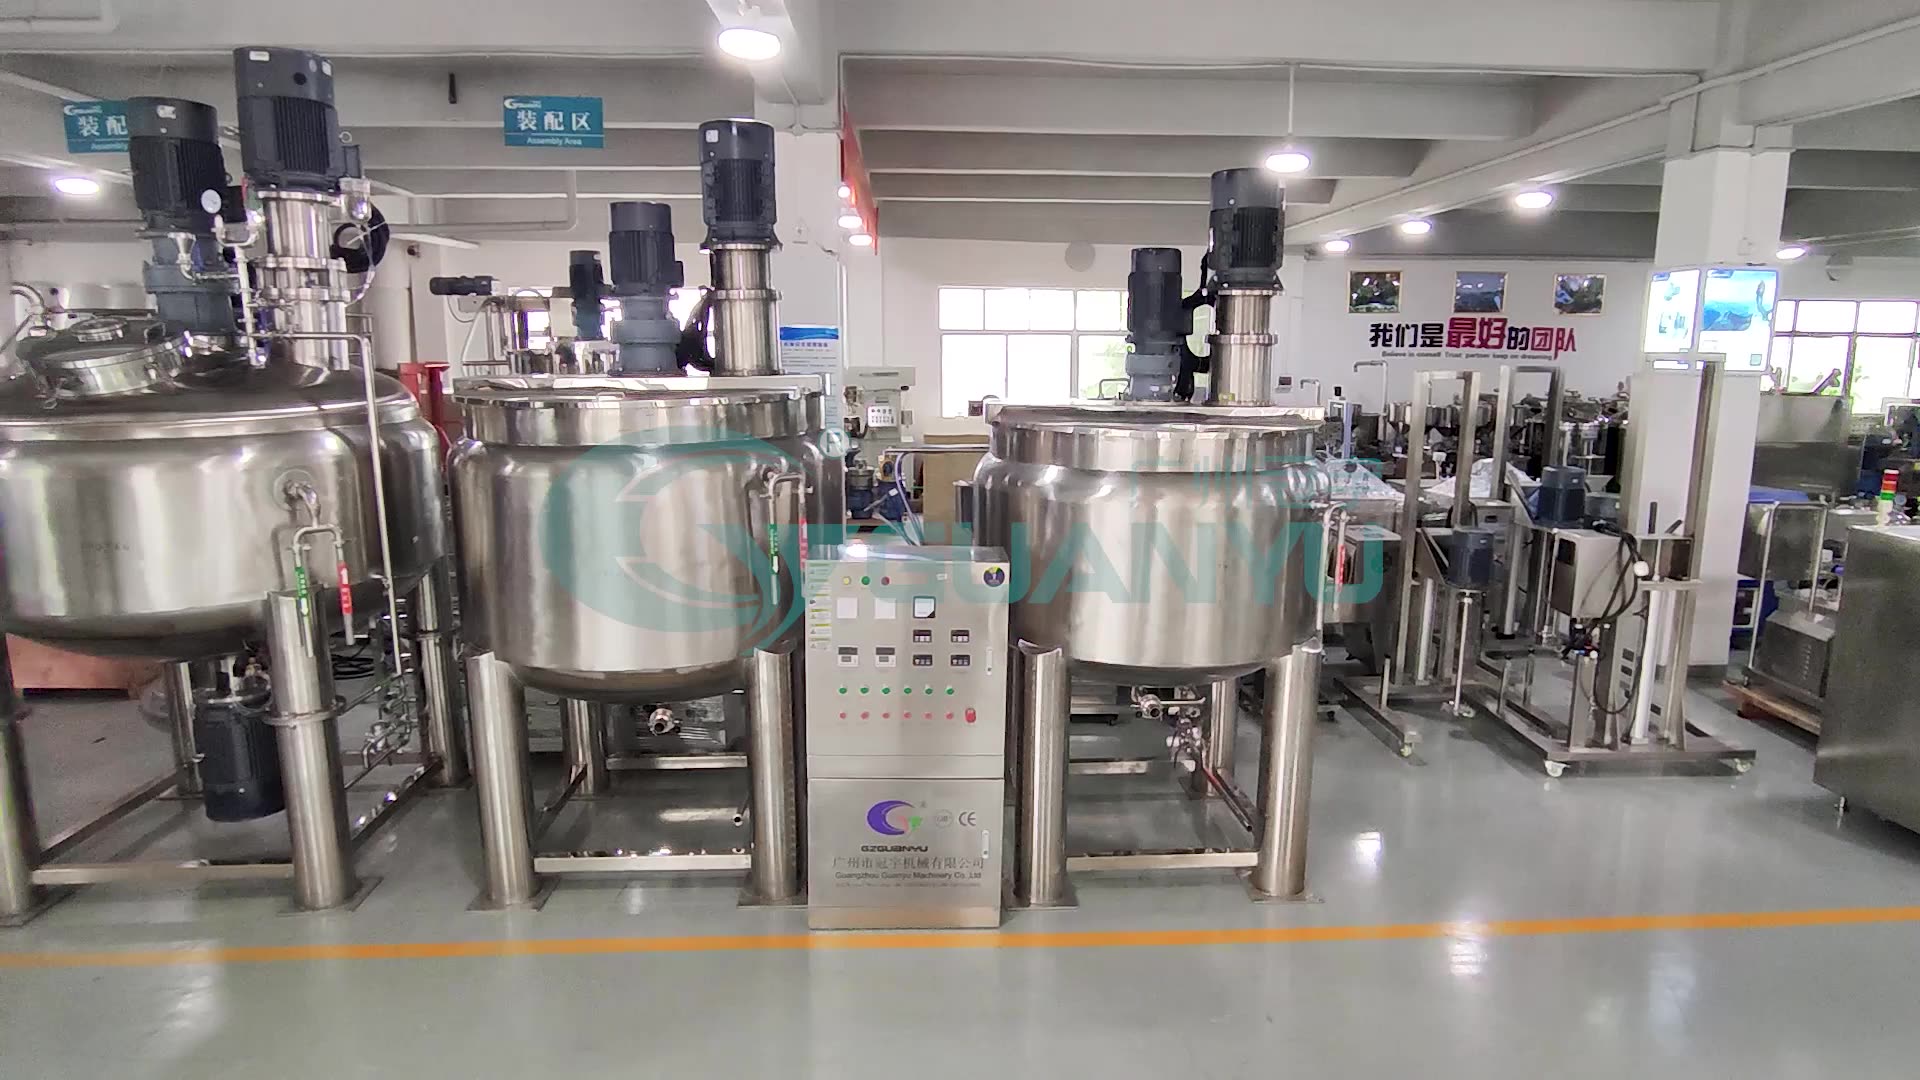 Best Mixing Tank Cosmetic Emulsion Beverage Stirring Vessel Mixing Tank With Agitator Mixing Equipment Company - GUANYU